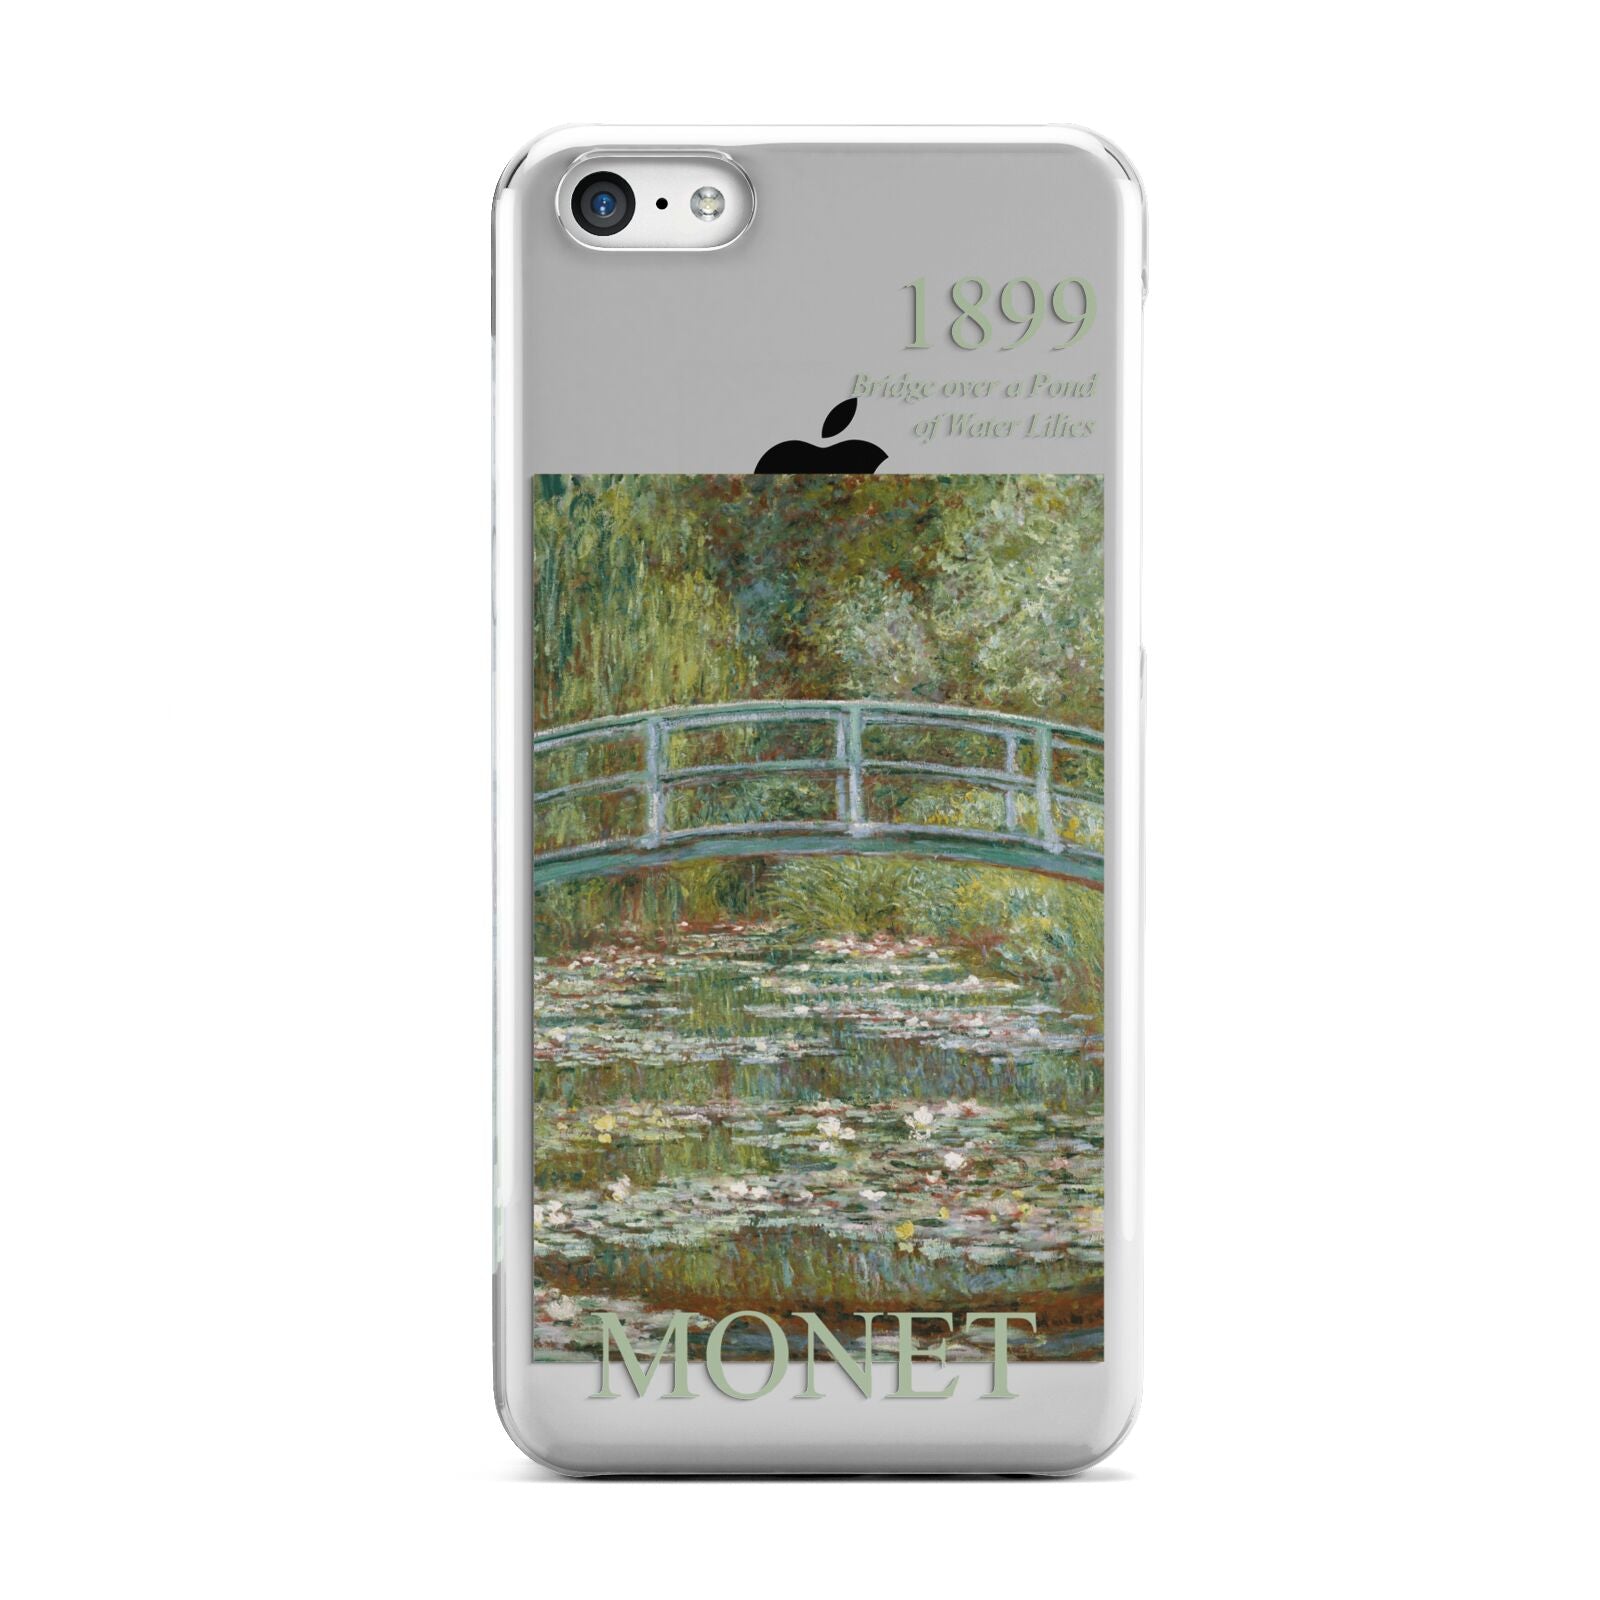 Bridge Over A Pond Of Water Lilies By Monet Apple iPhone 5c Case